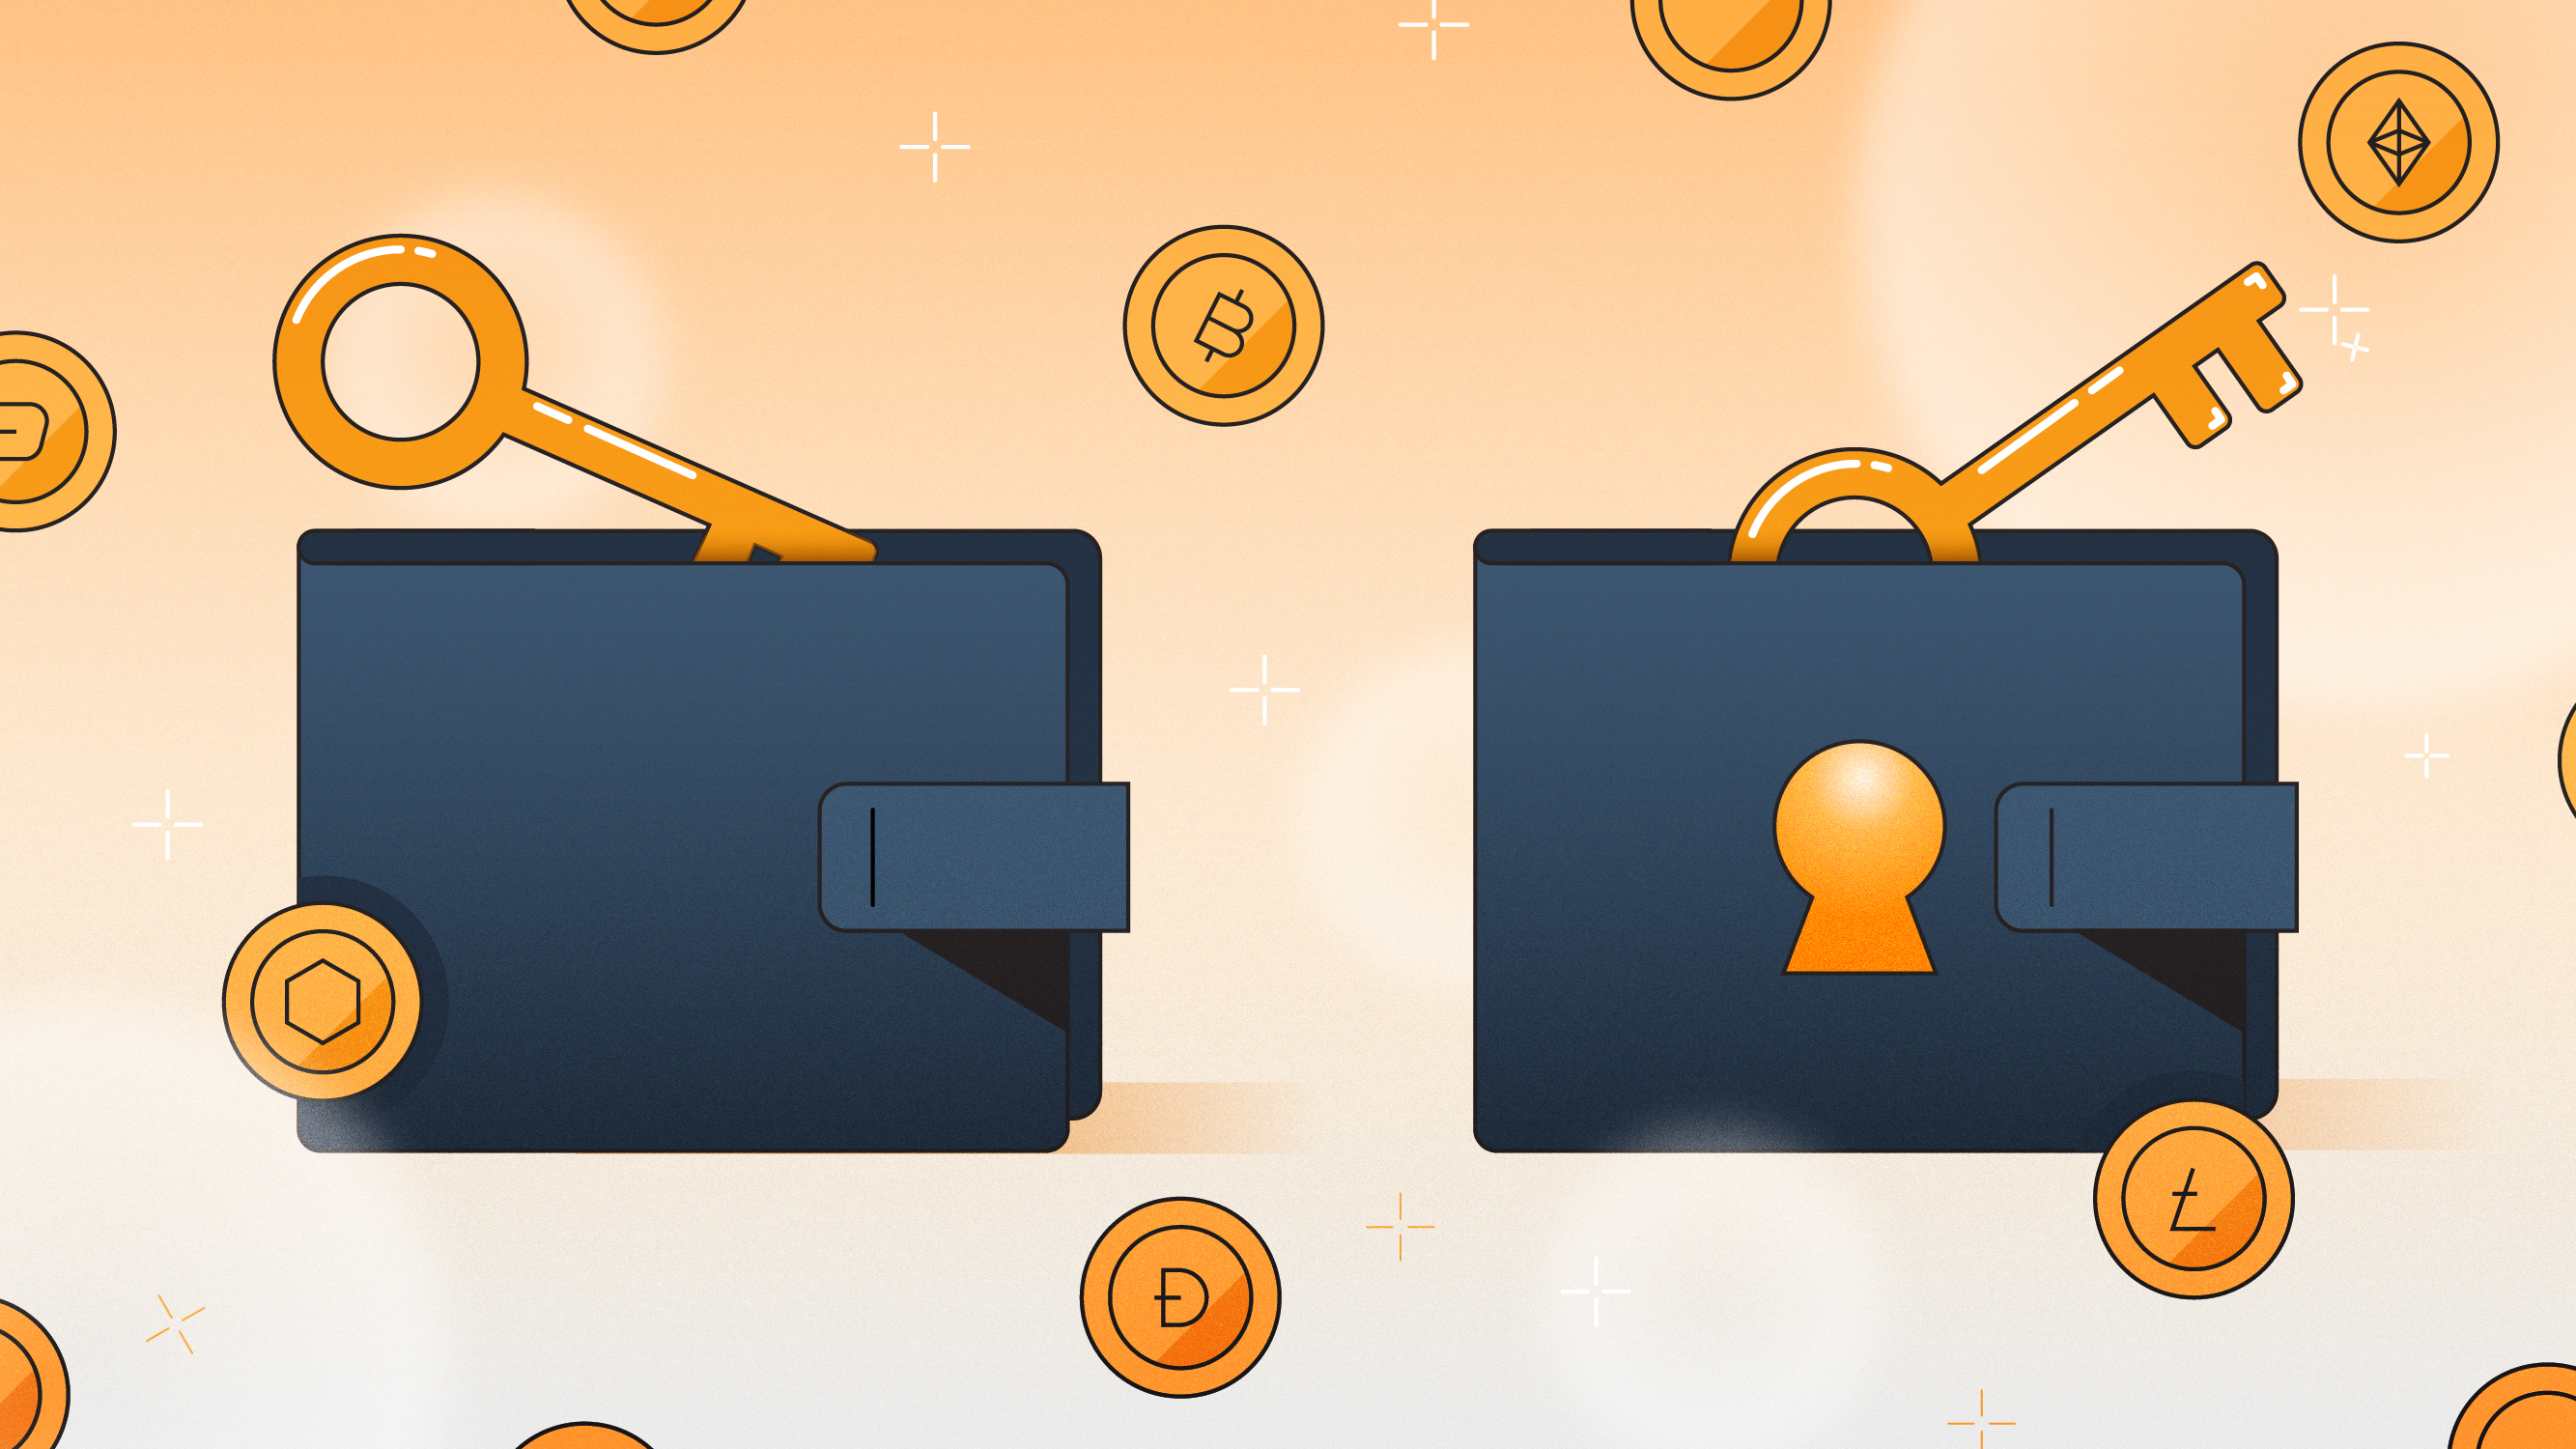 Blue-and-orange illustrations signifying custodial and self-custodial wallets, surrounded by key imagery and logos of various cryptocurrency coin logos.